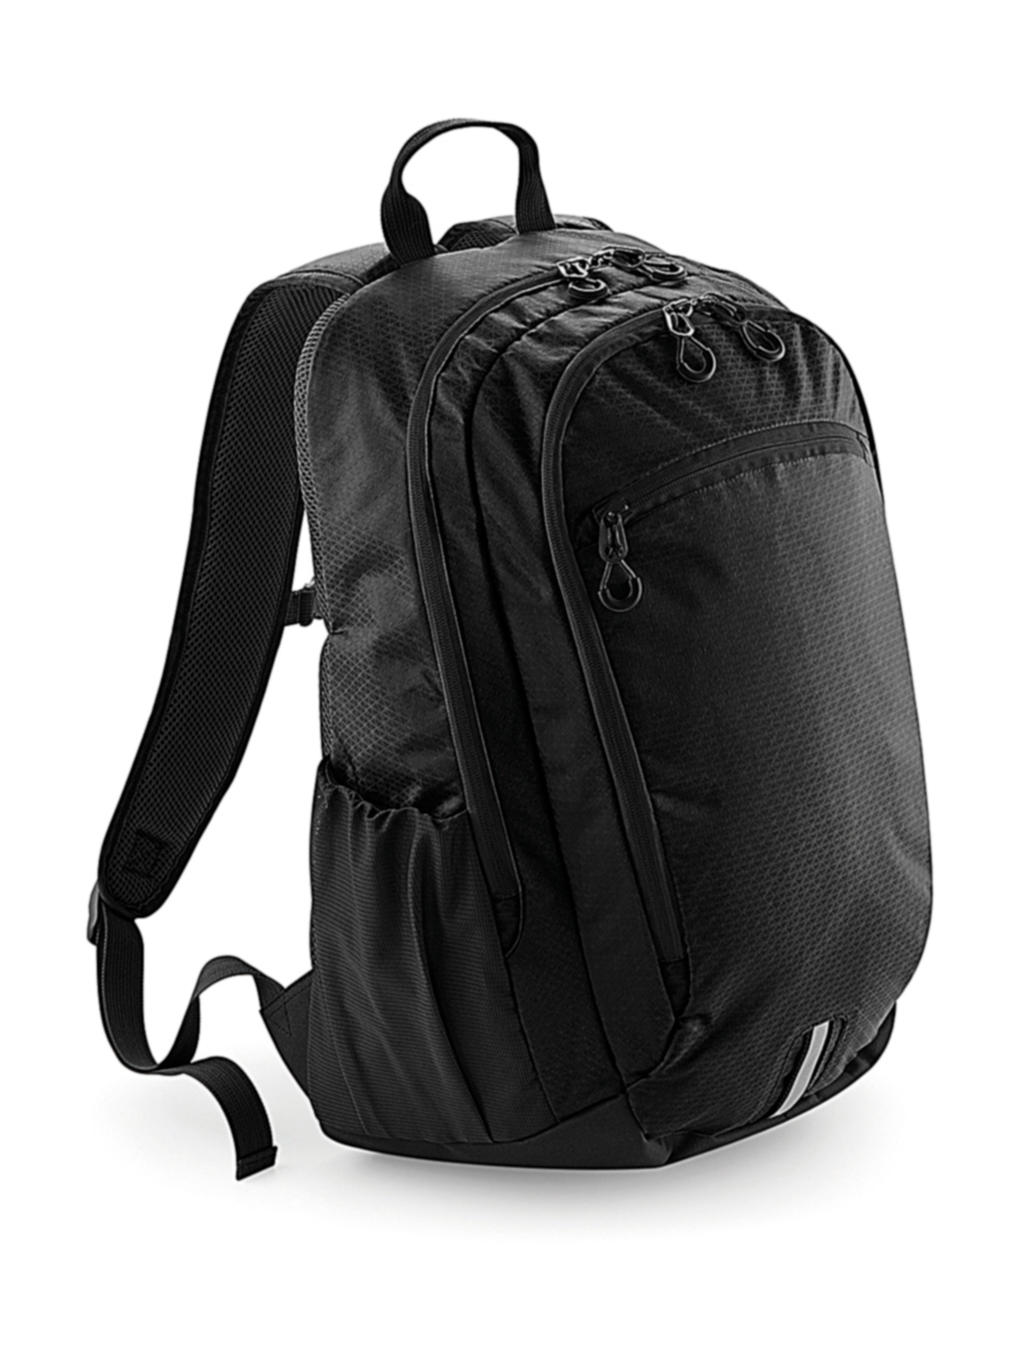 Endeavour Backpack